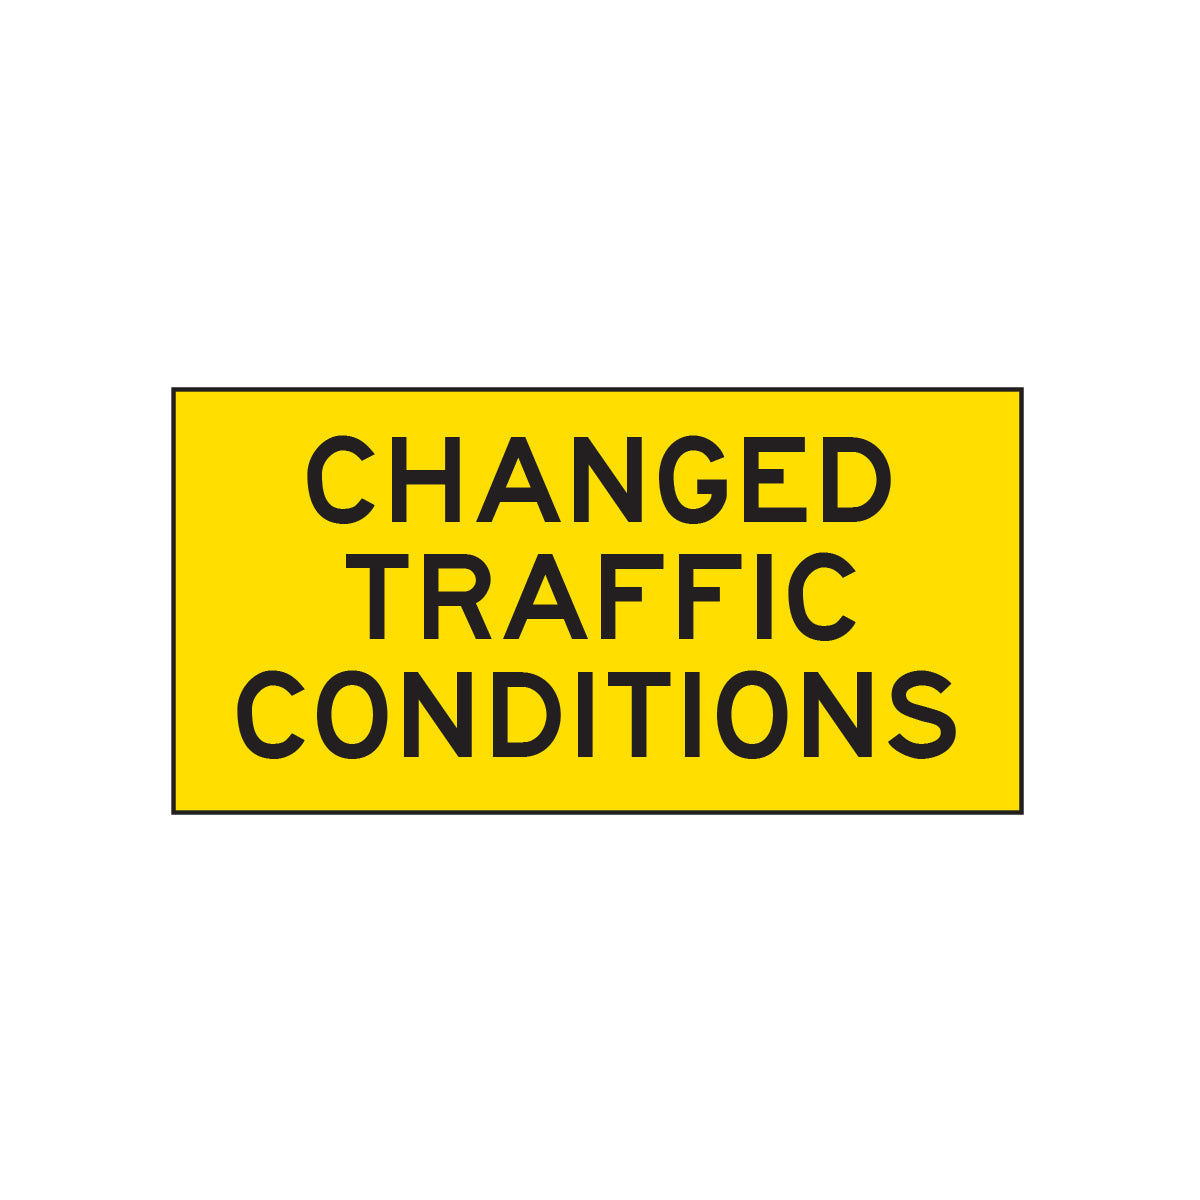 Warning: Changed Traffic Conditions Sign